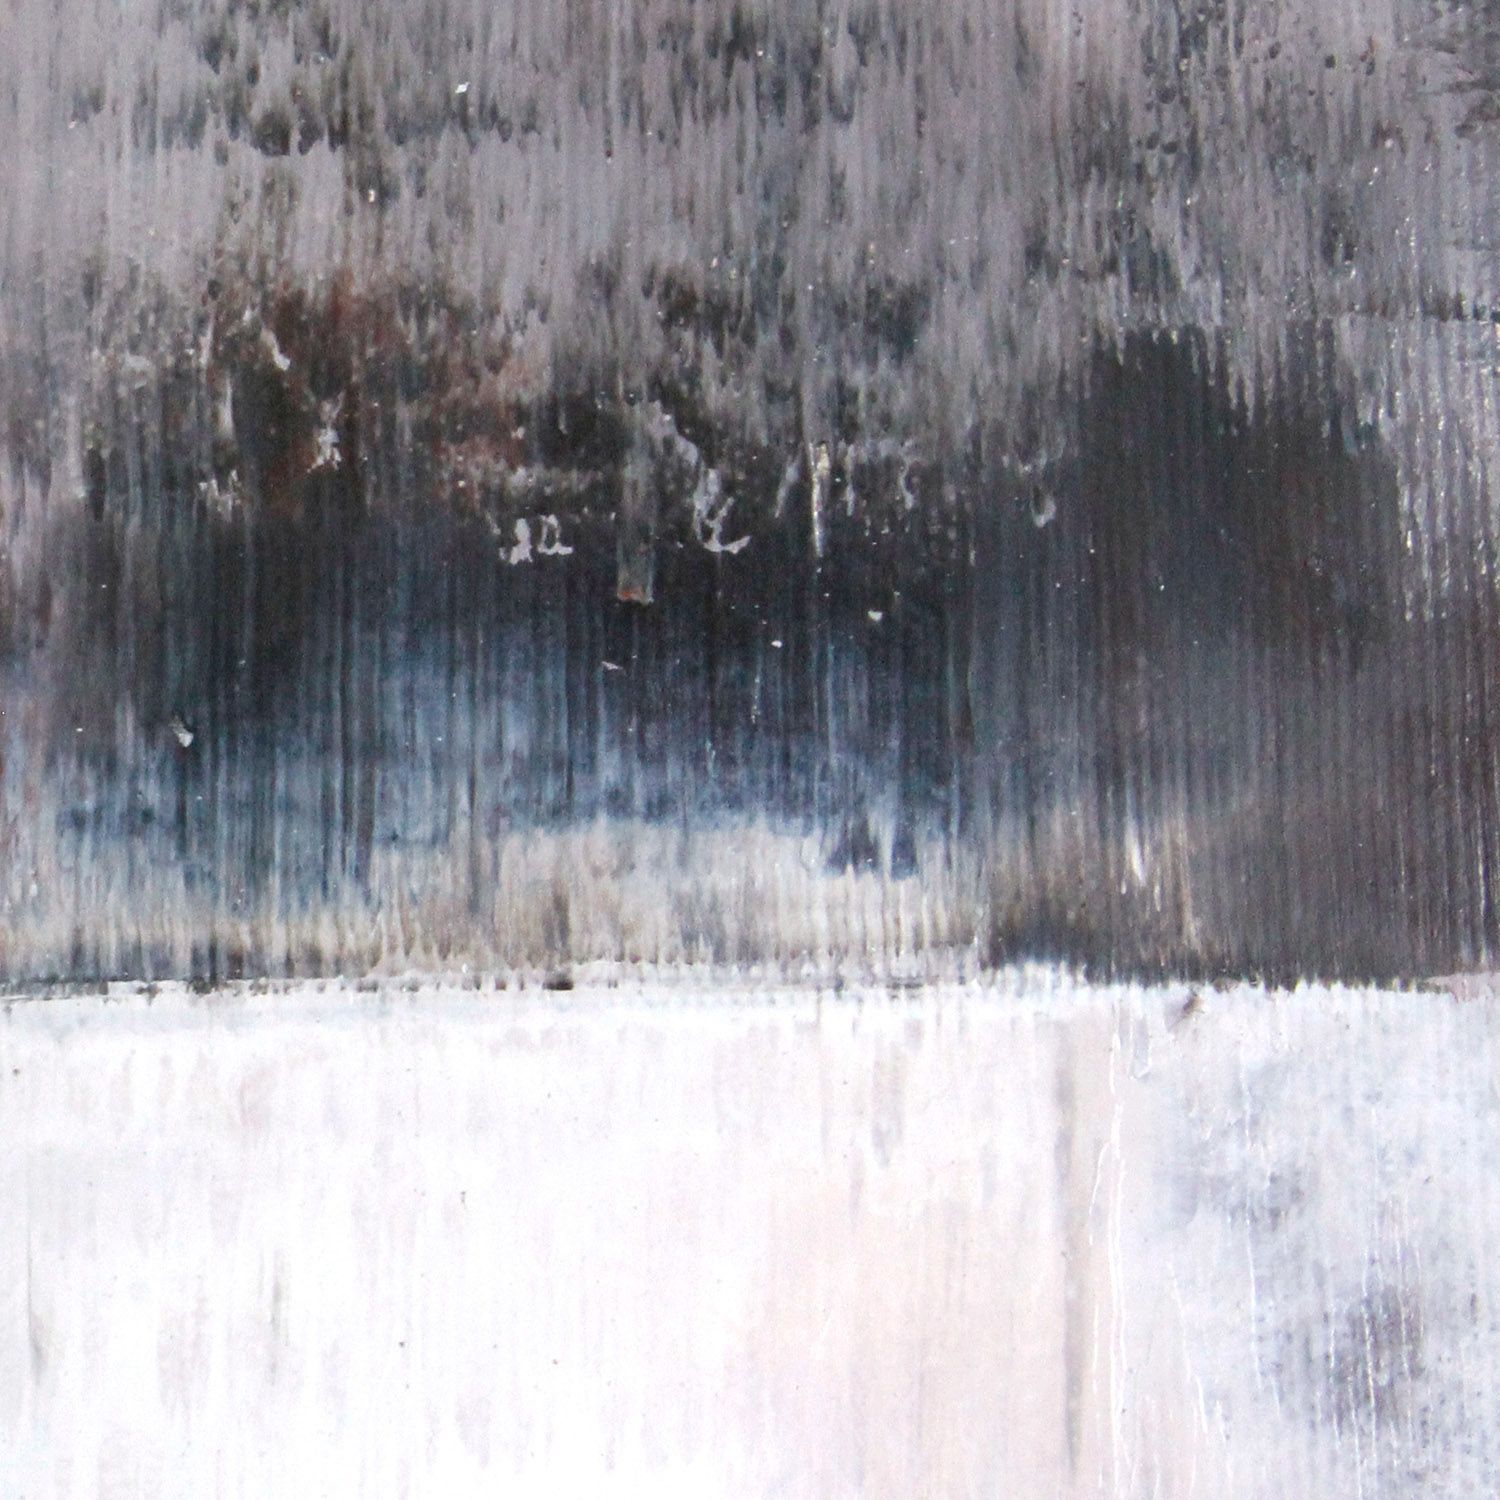 A detail of the painting showing the layers of the artist's brushwork - Gray